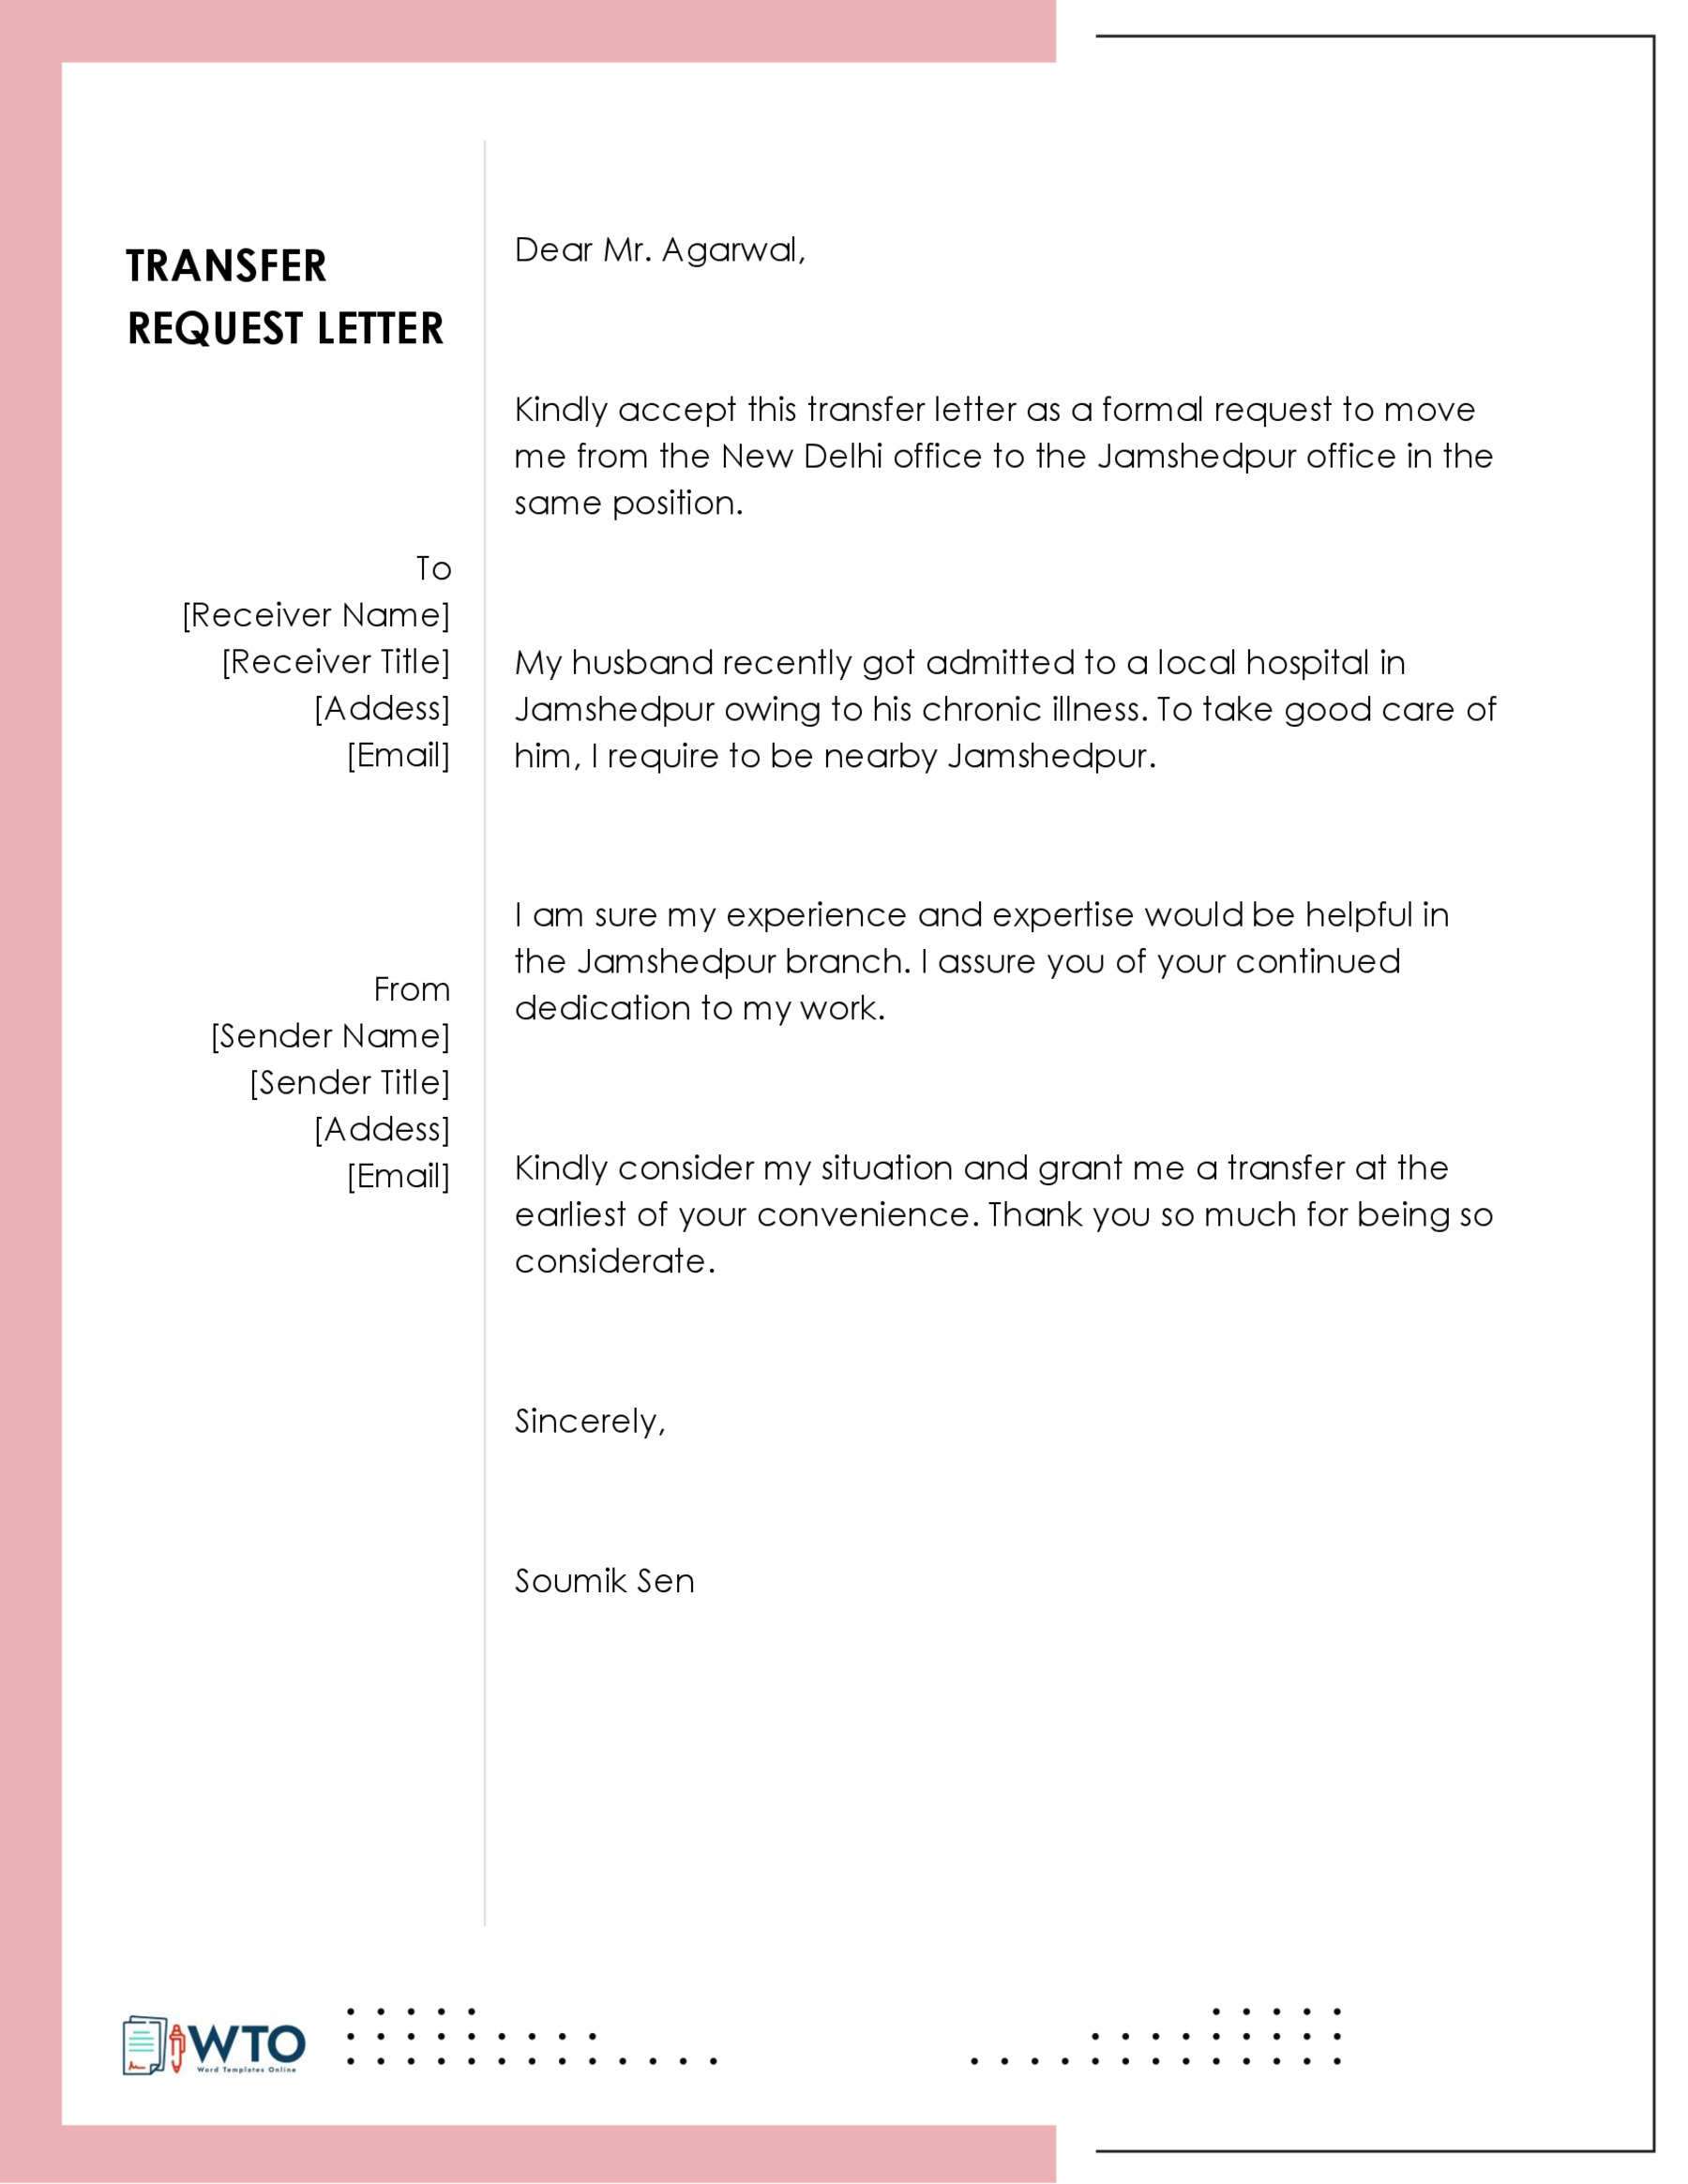 Free Editable Transfer Request Letter Sample 13 in Word Format